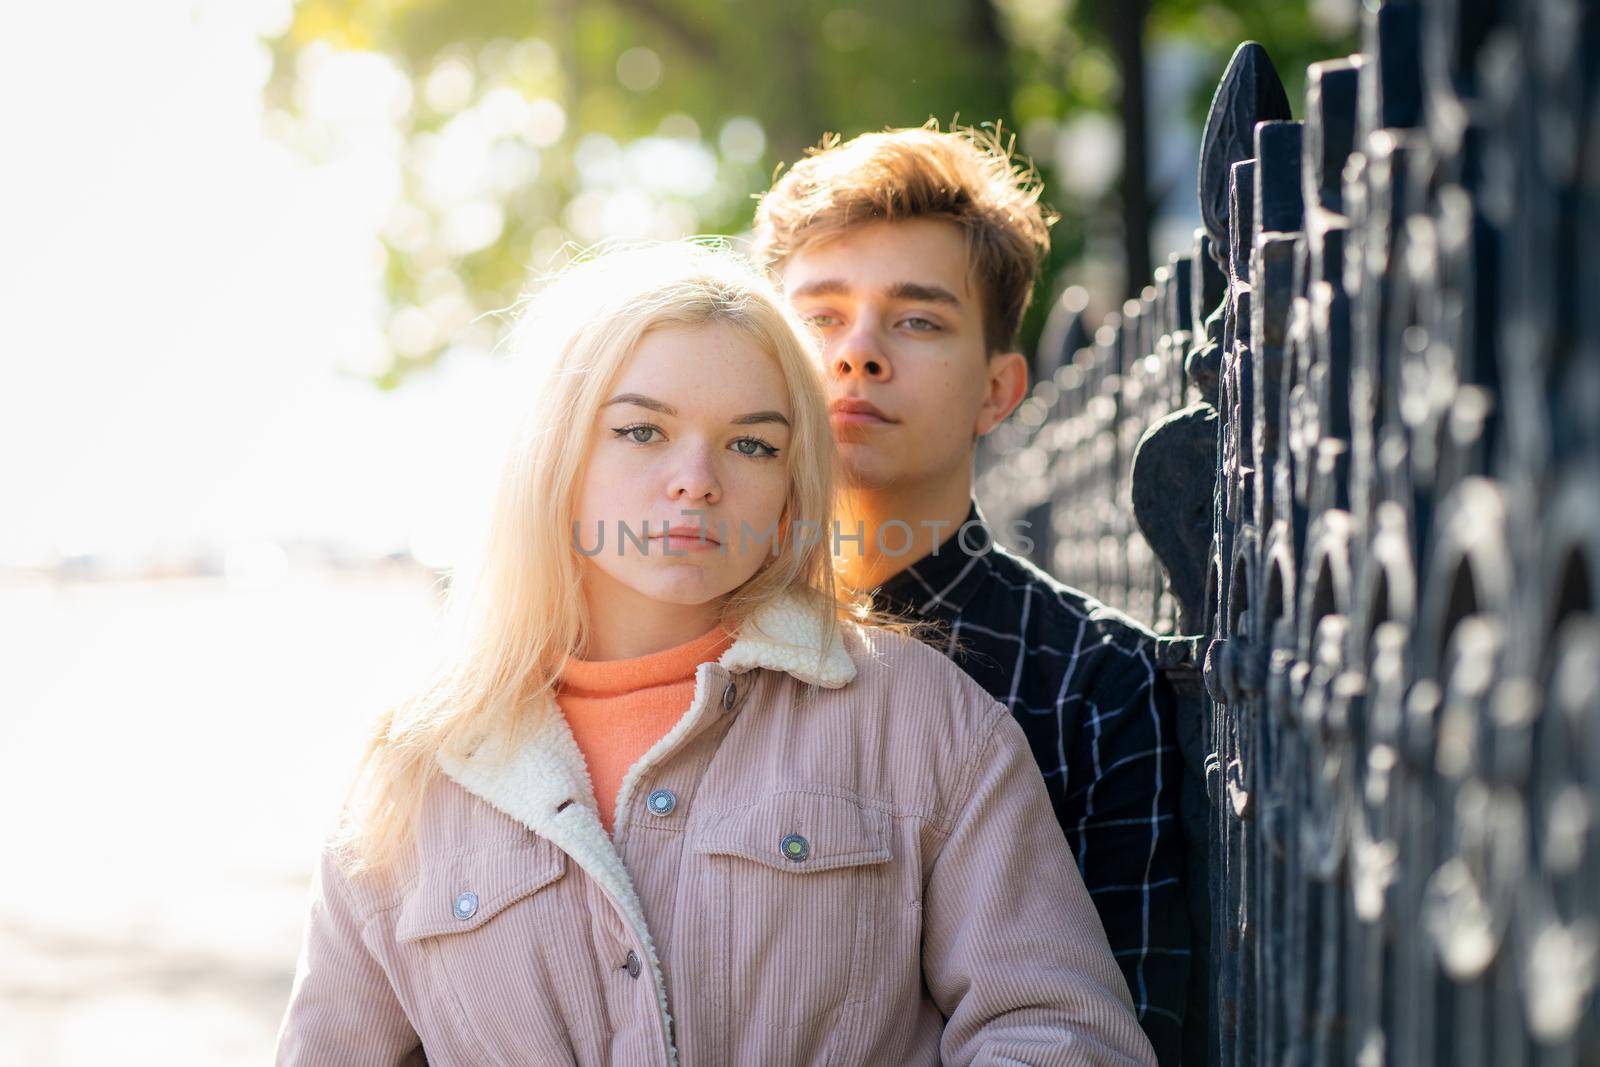 A man gently hugs a woman, a guy and a girl are close to fence of Park, looking forward. The concept of first teenage love and first kiss. A boy with dark hair and girl blonde Scandinavian looks, couple. by NataBene